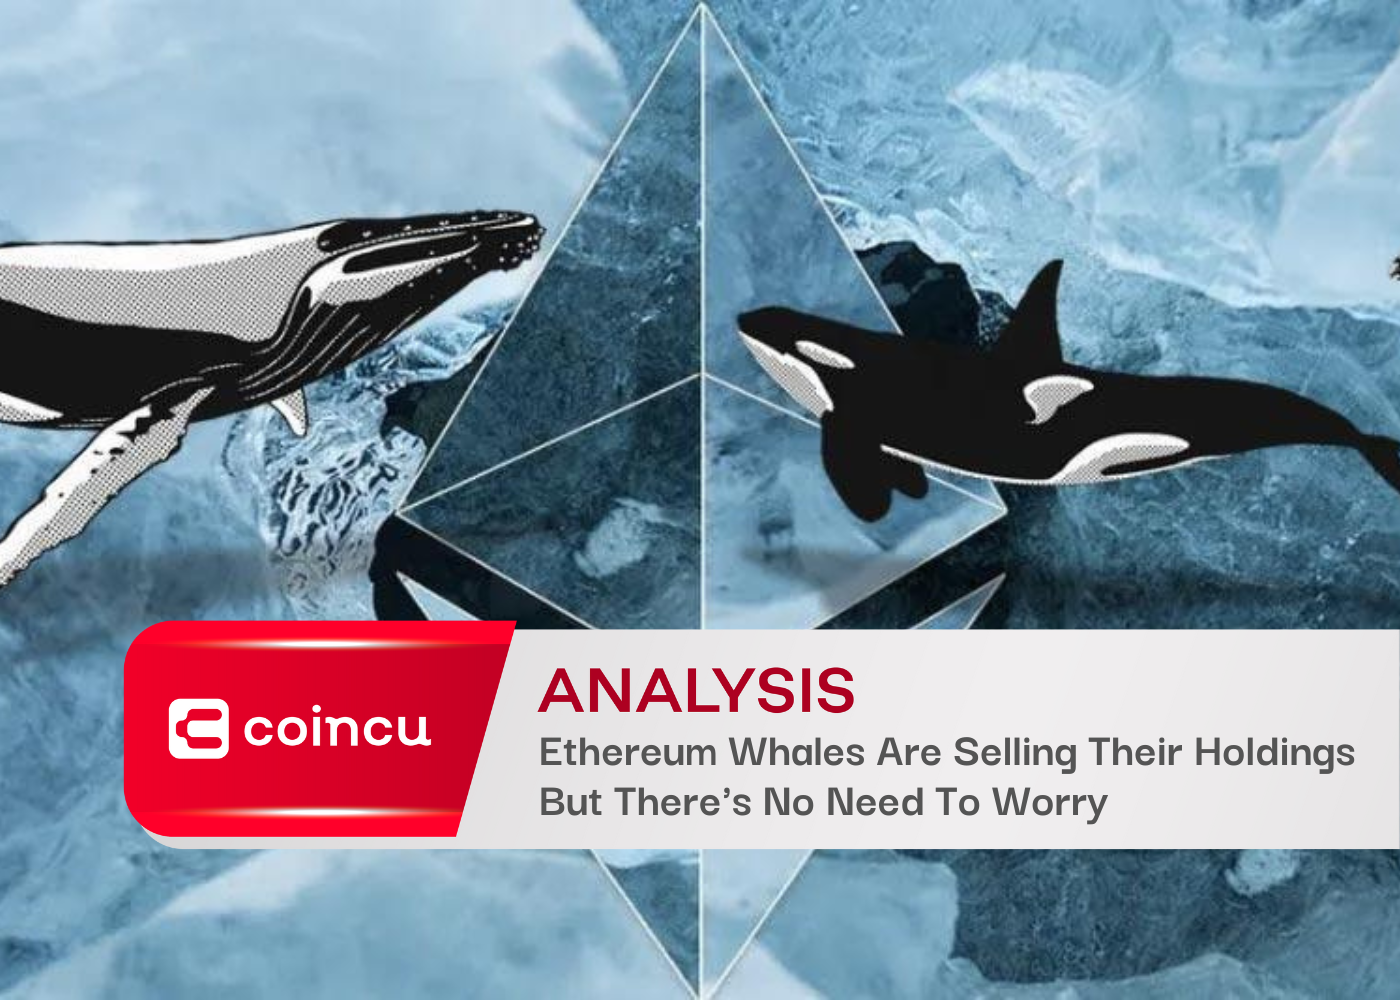 Ethereum Whales Are Selling Their Holdings